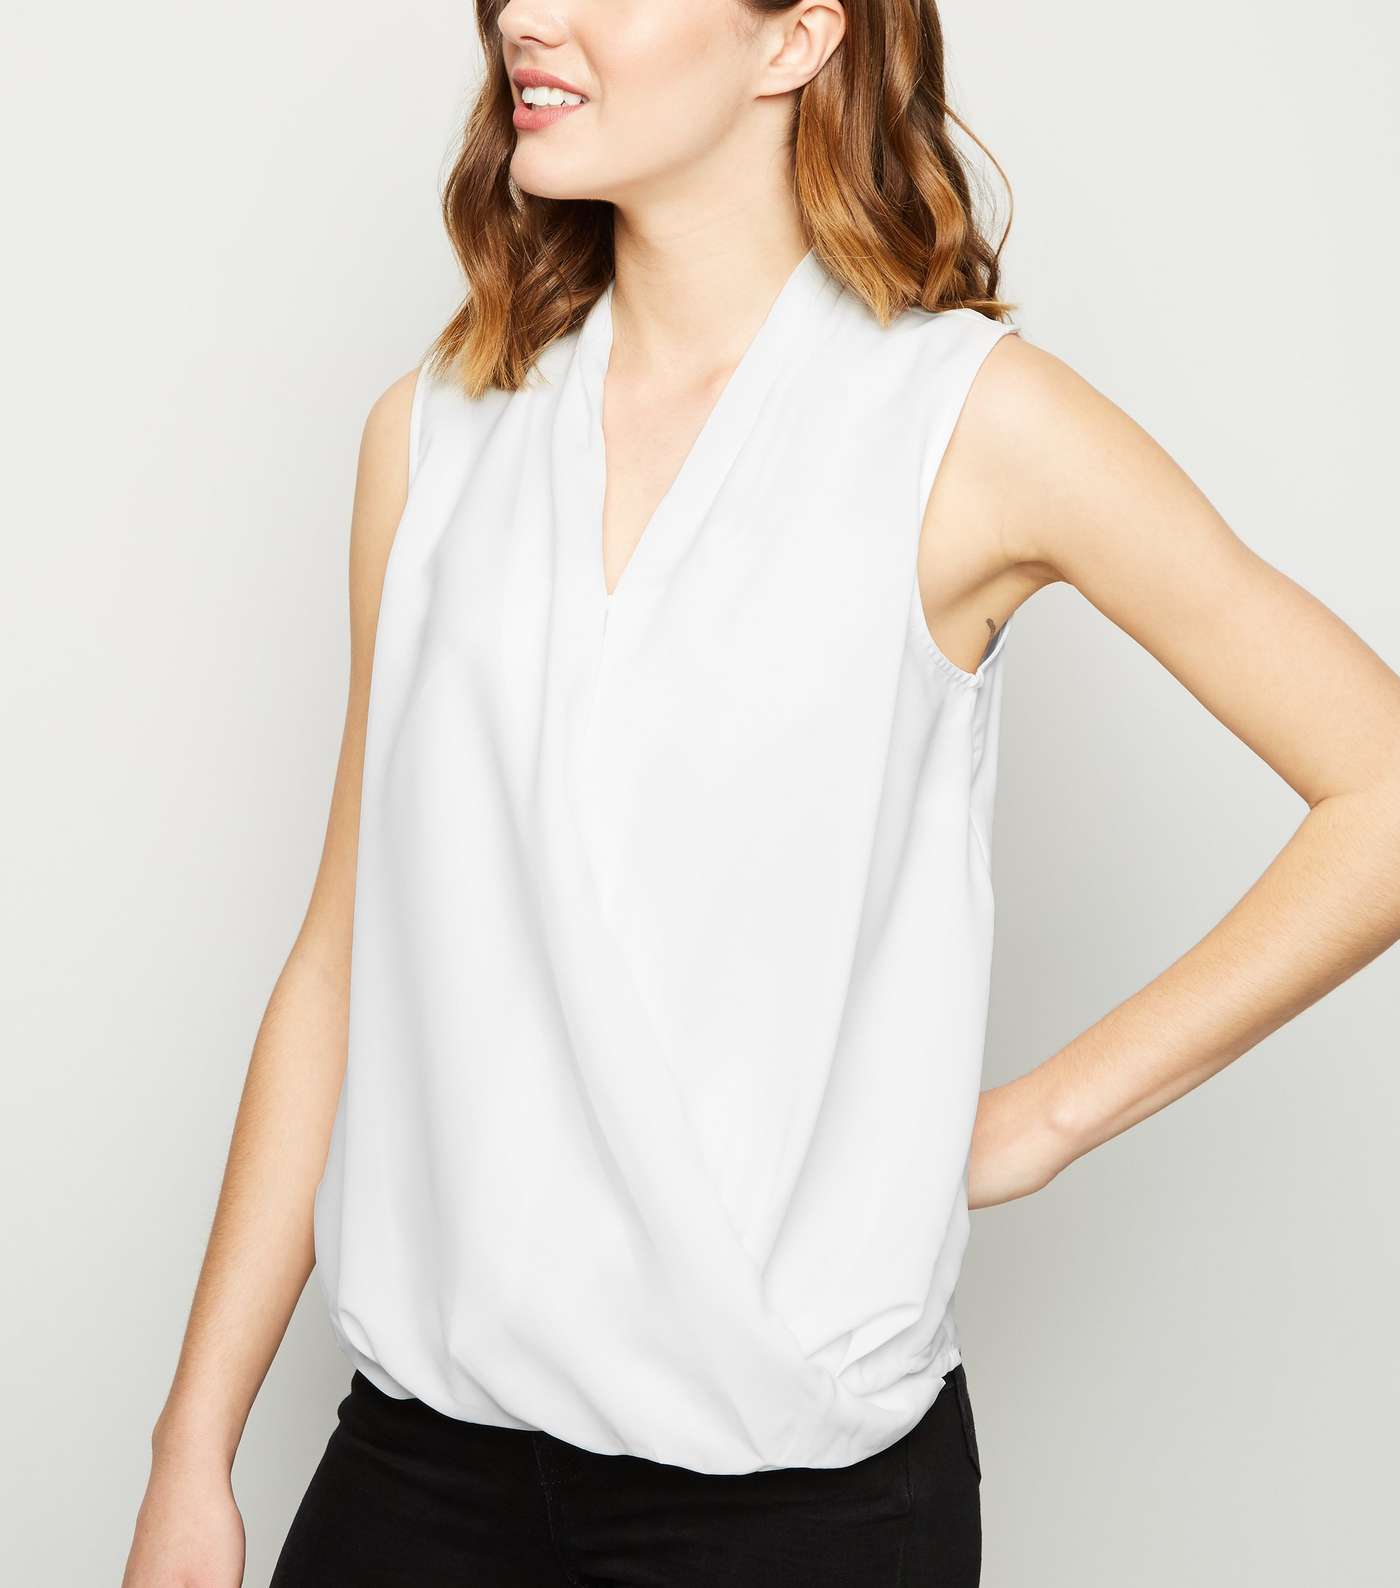 Apricot White Crossover Wrap Top